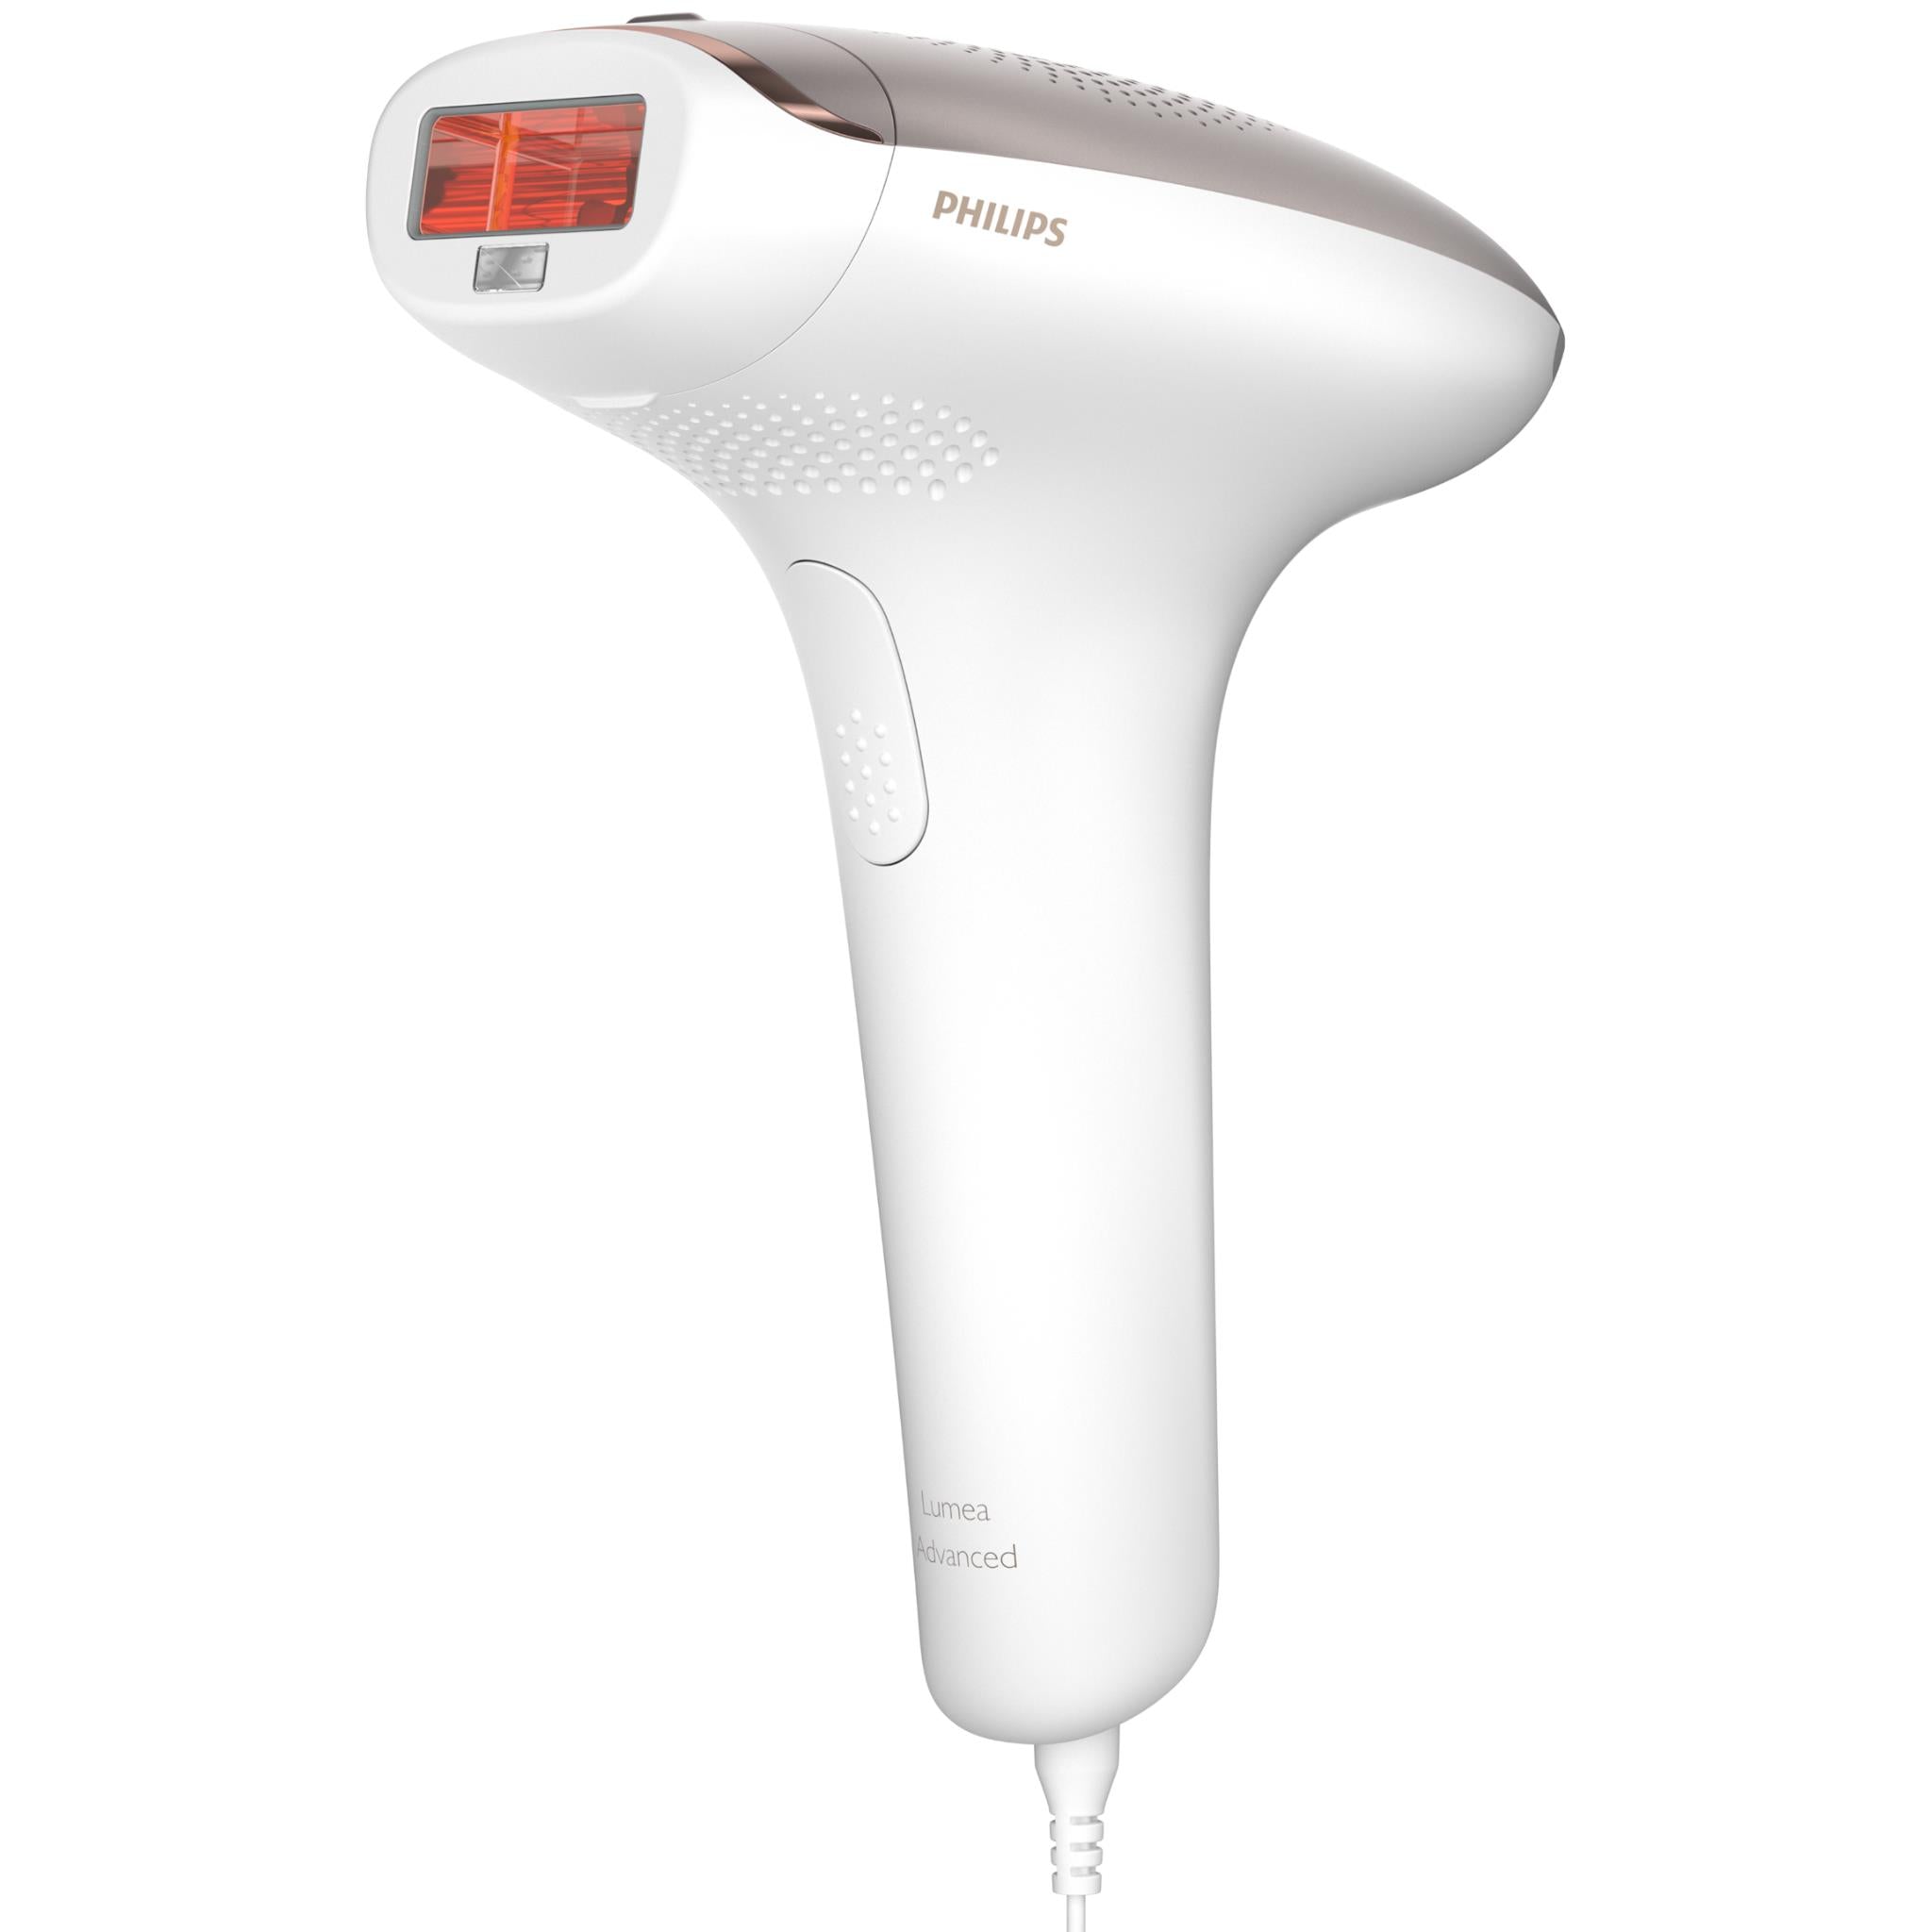 Philips Lumea - dots on the glass : r/HairRemoval